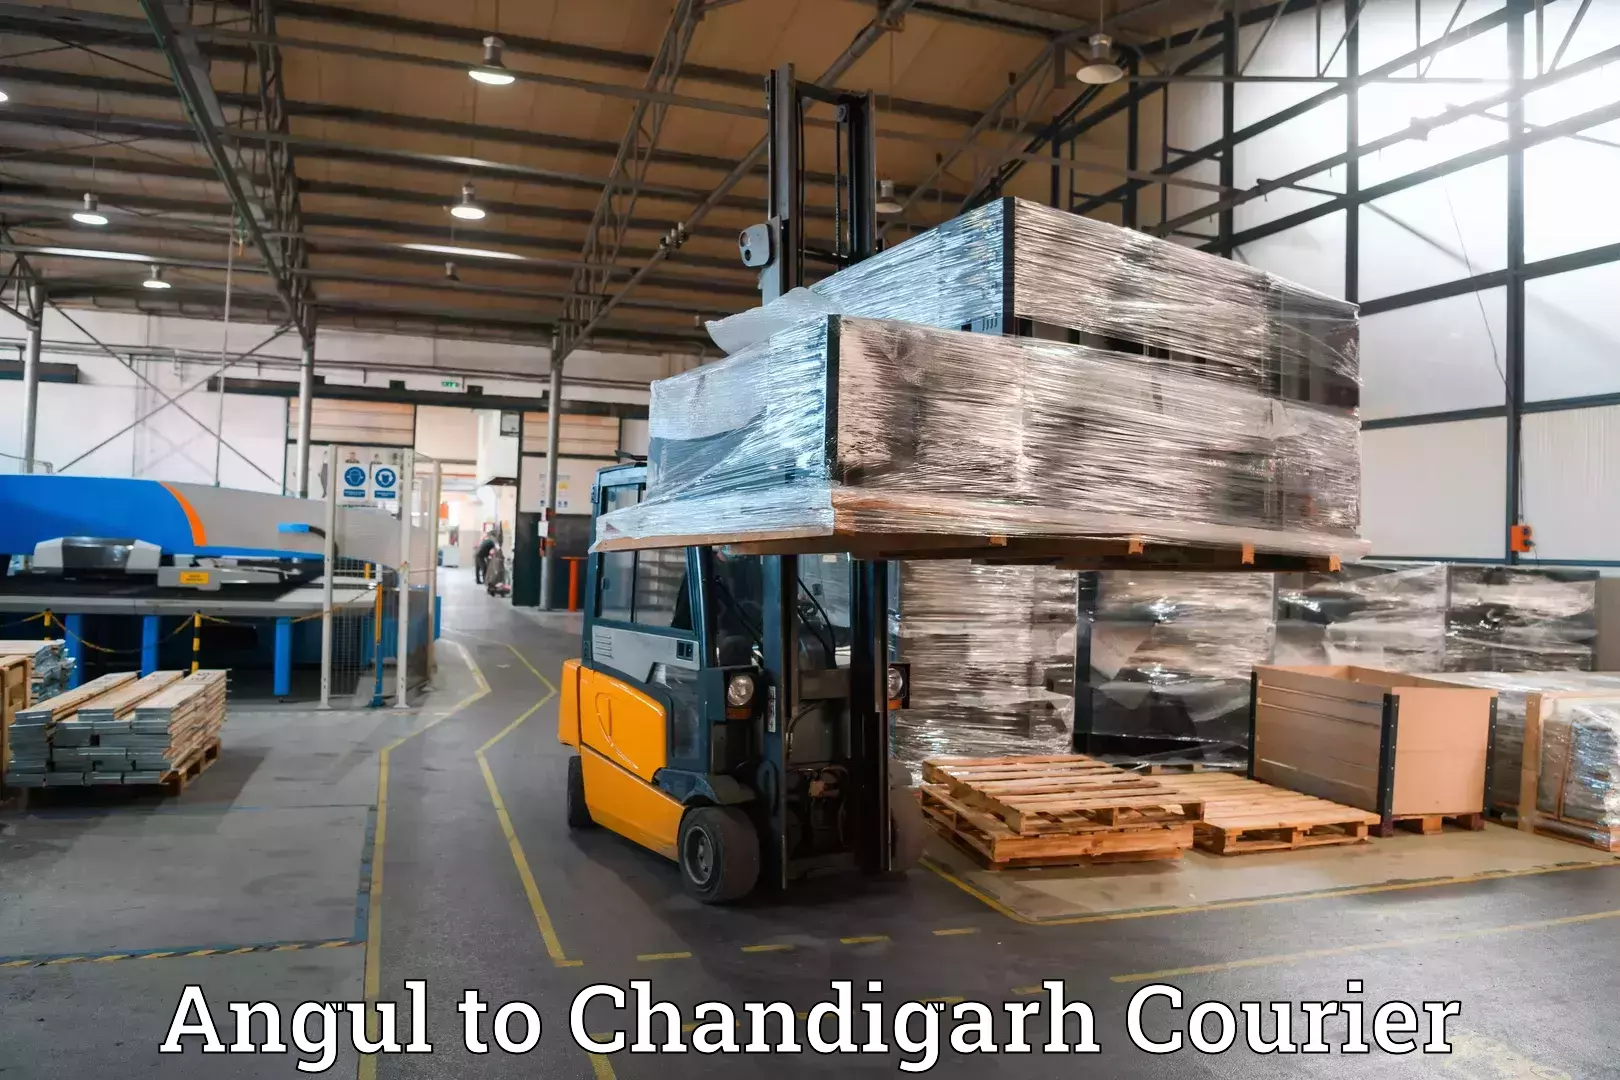 Luggage shipment specialists Angul to Chandigarh